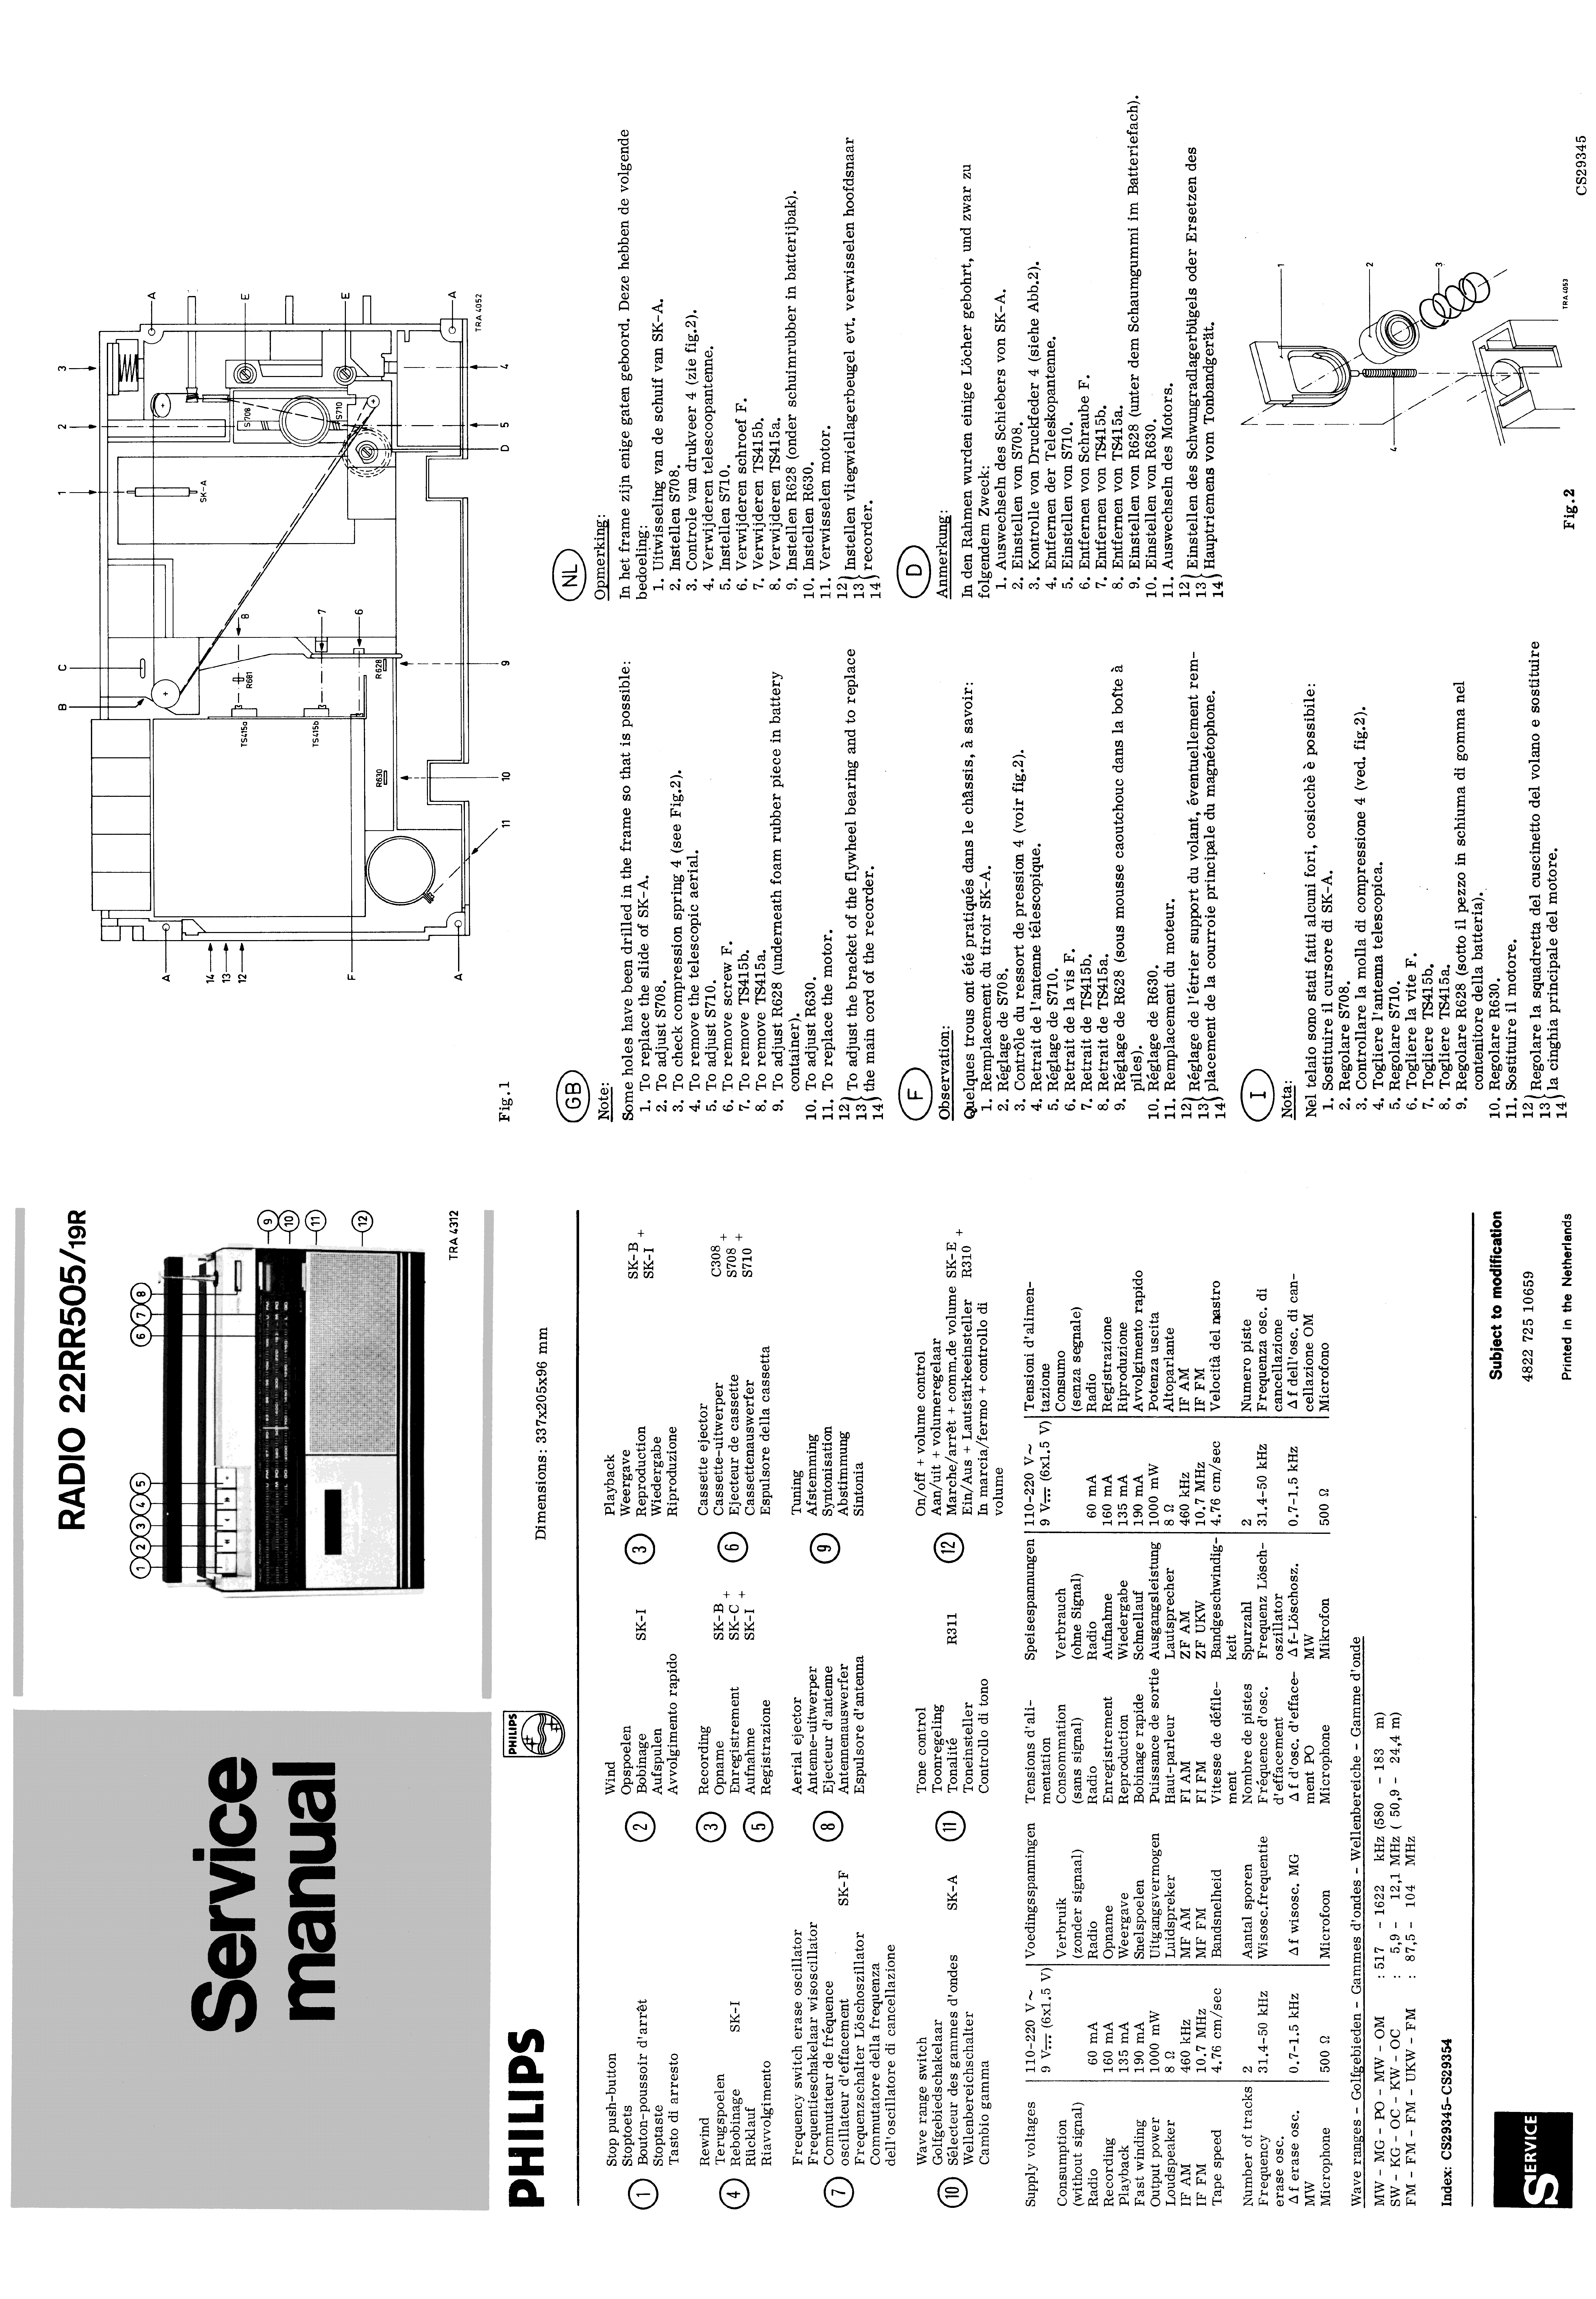 PHILIPS RADIO 22RR505 SM service manual (2nd page)